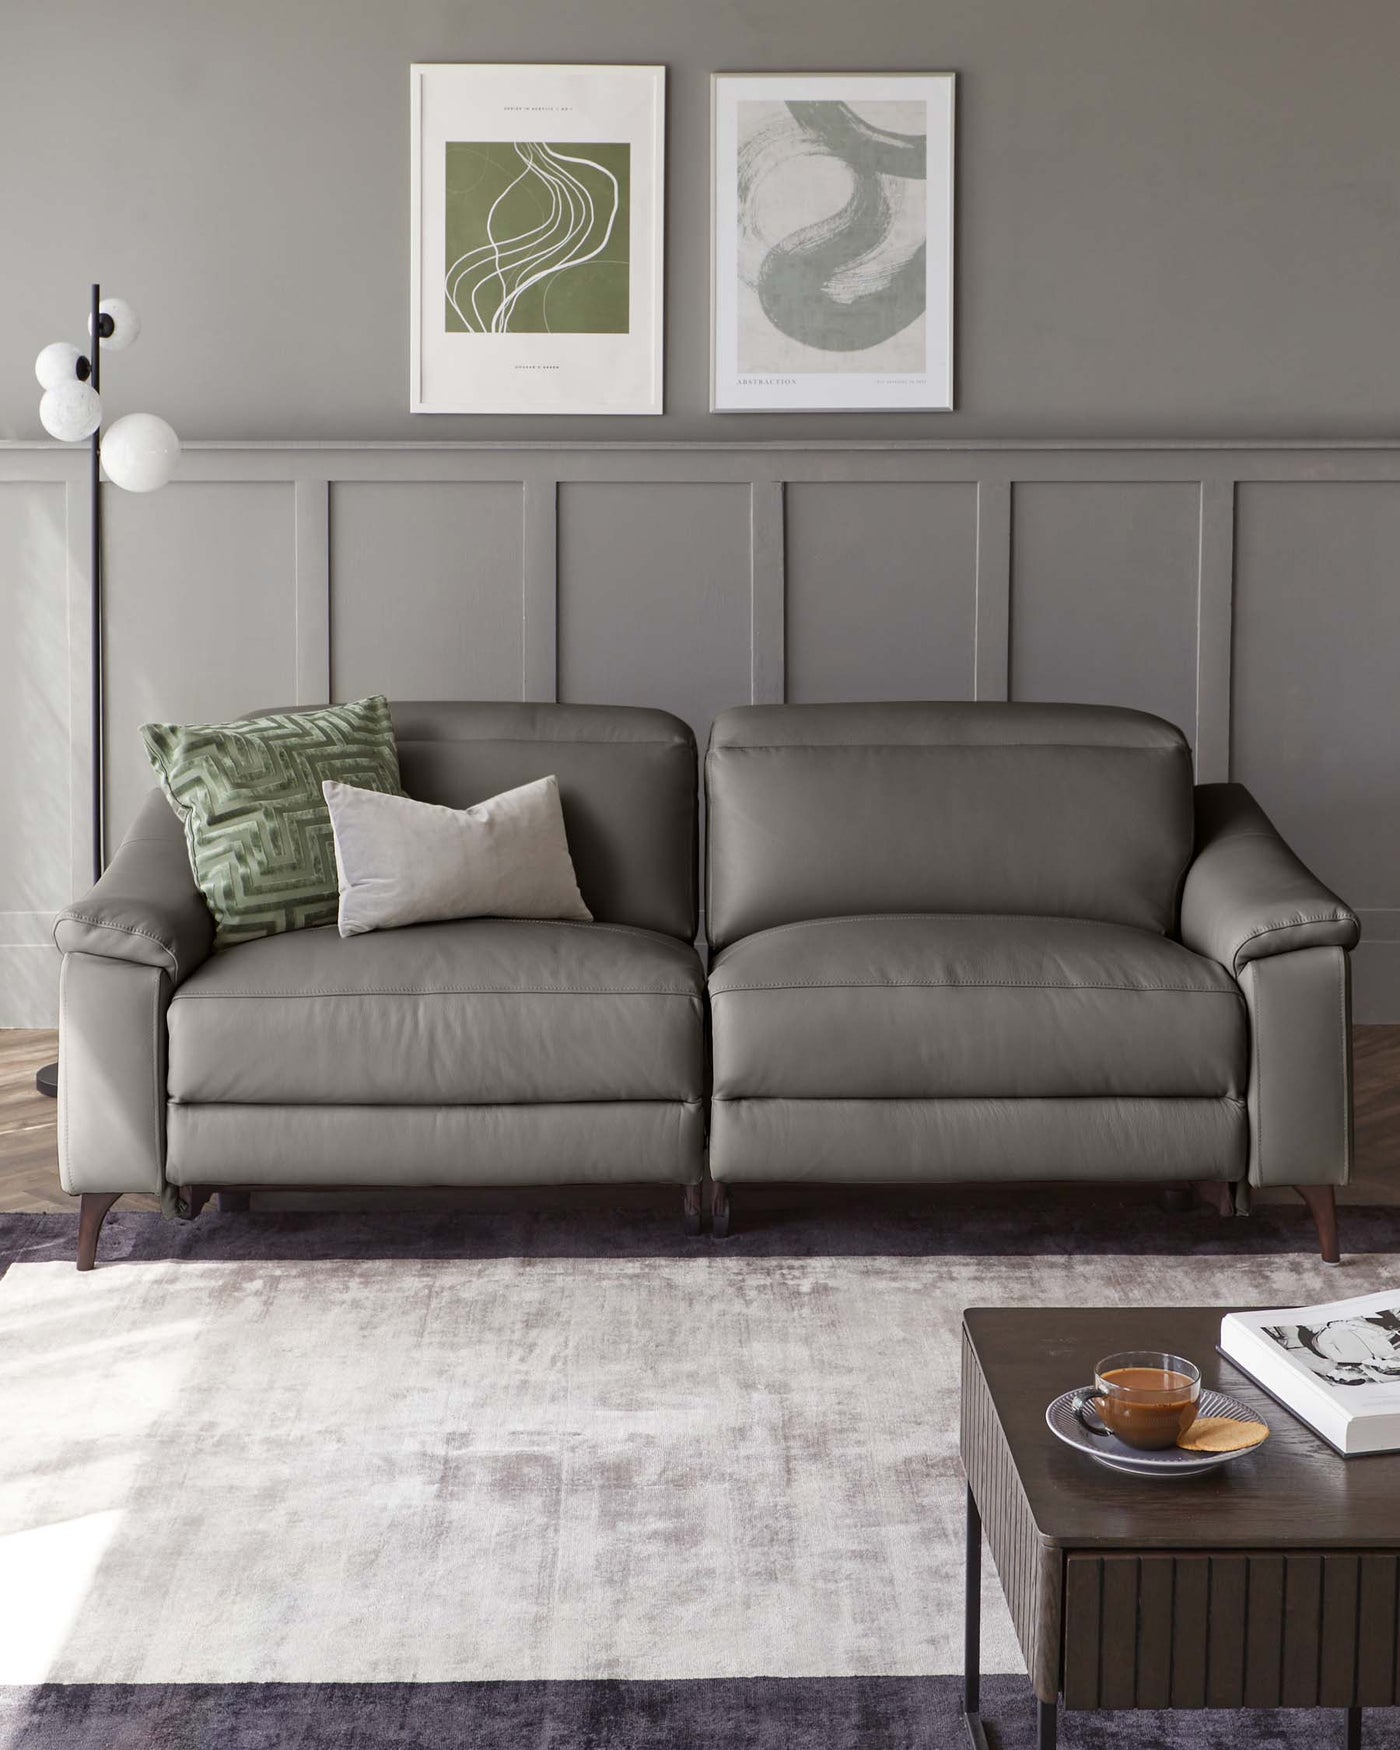 Modern grey upholstered sofa with plush cushions, accented by a light grey and white throw pillow, a green patterned pillow, and situated on a faded-grey area rug. Beside it is a contemporary dark wood coffee table with a glass teacup and saucer, and a book with a monochrome cover.